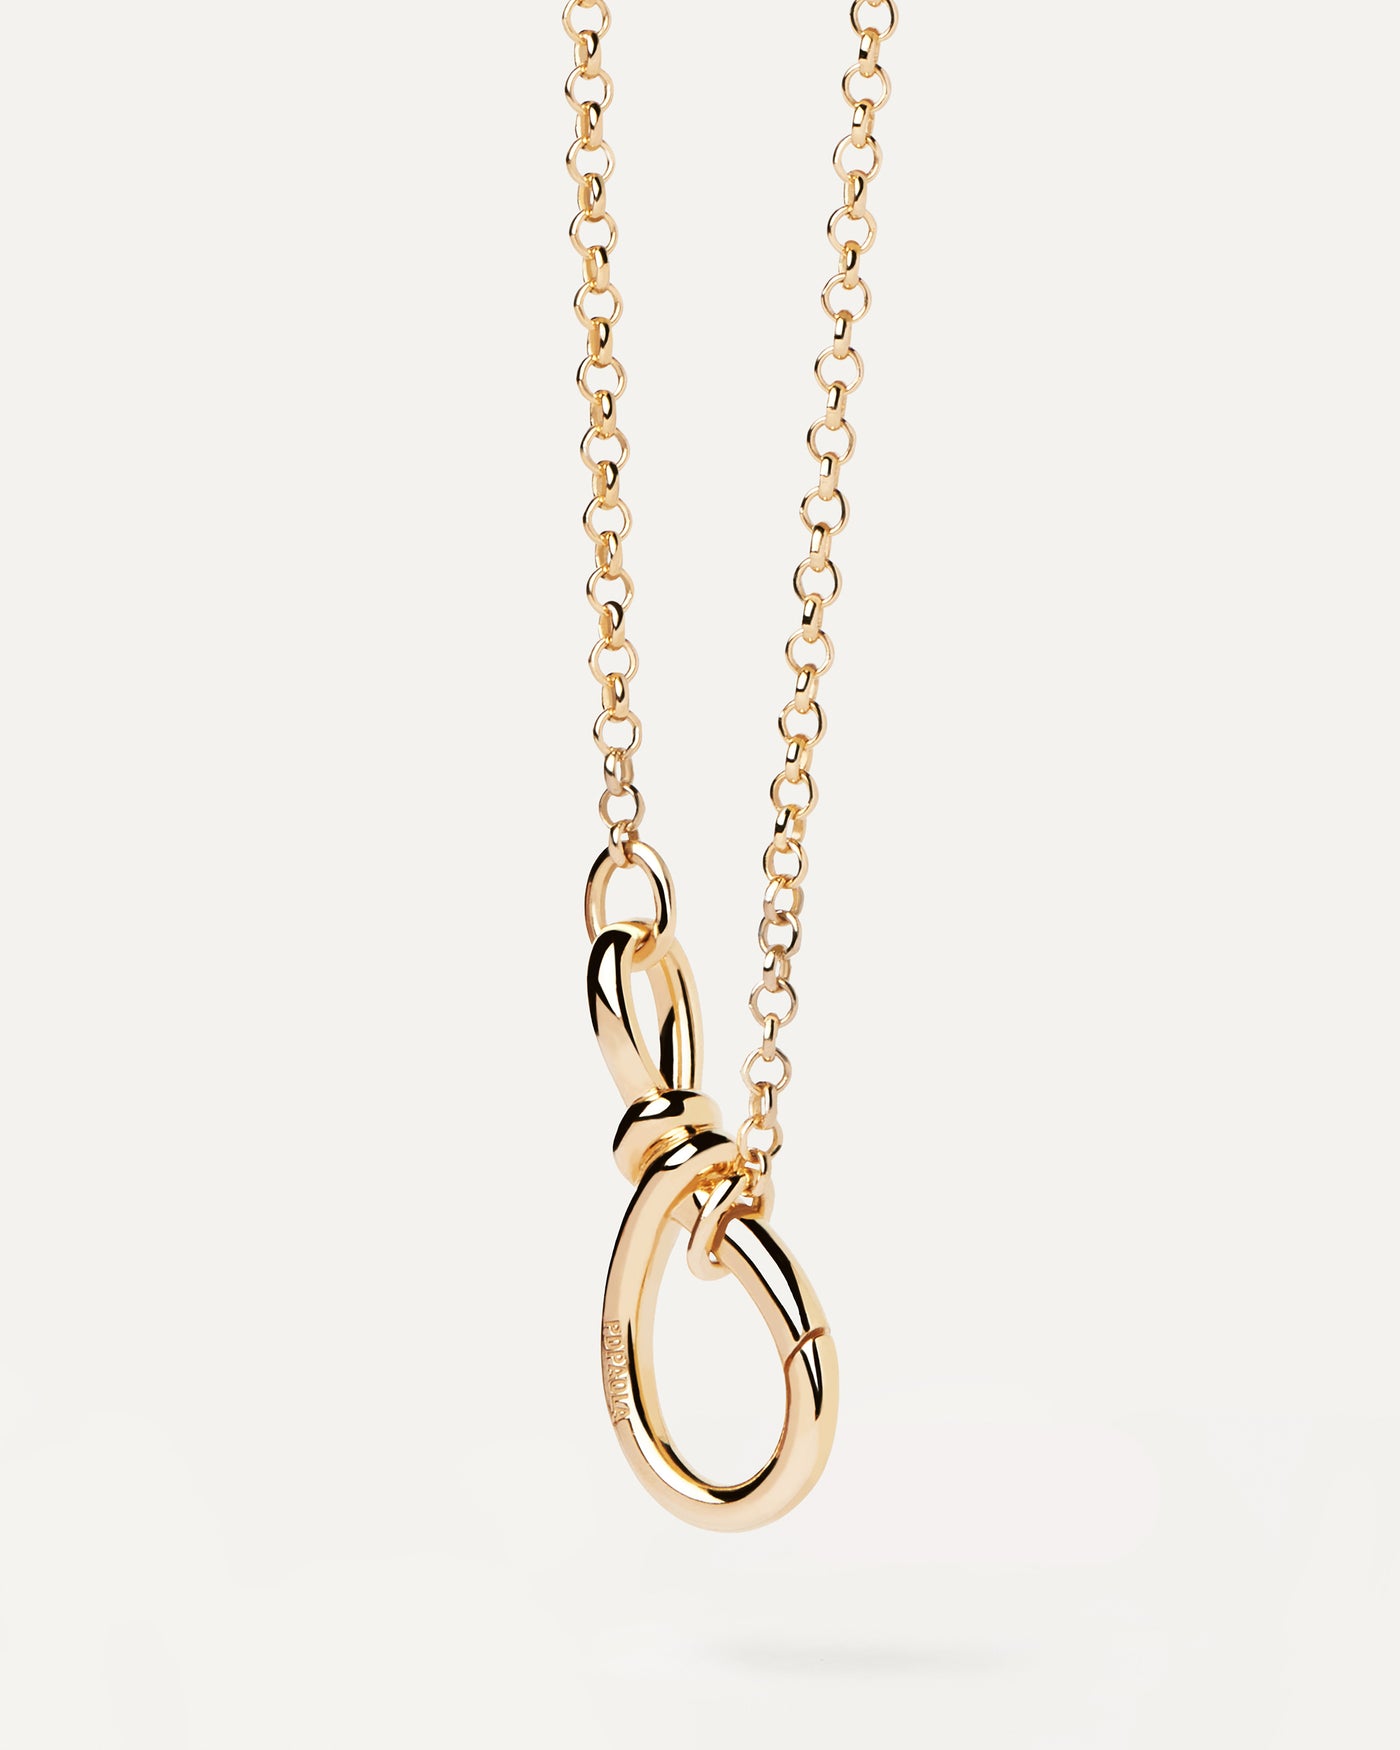 2023 Selection | Stacker Clasp Chain Necklace. Get the latest arrival from PDPAOLA. Place your order safely and get this Best Seller. Free Shipping.